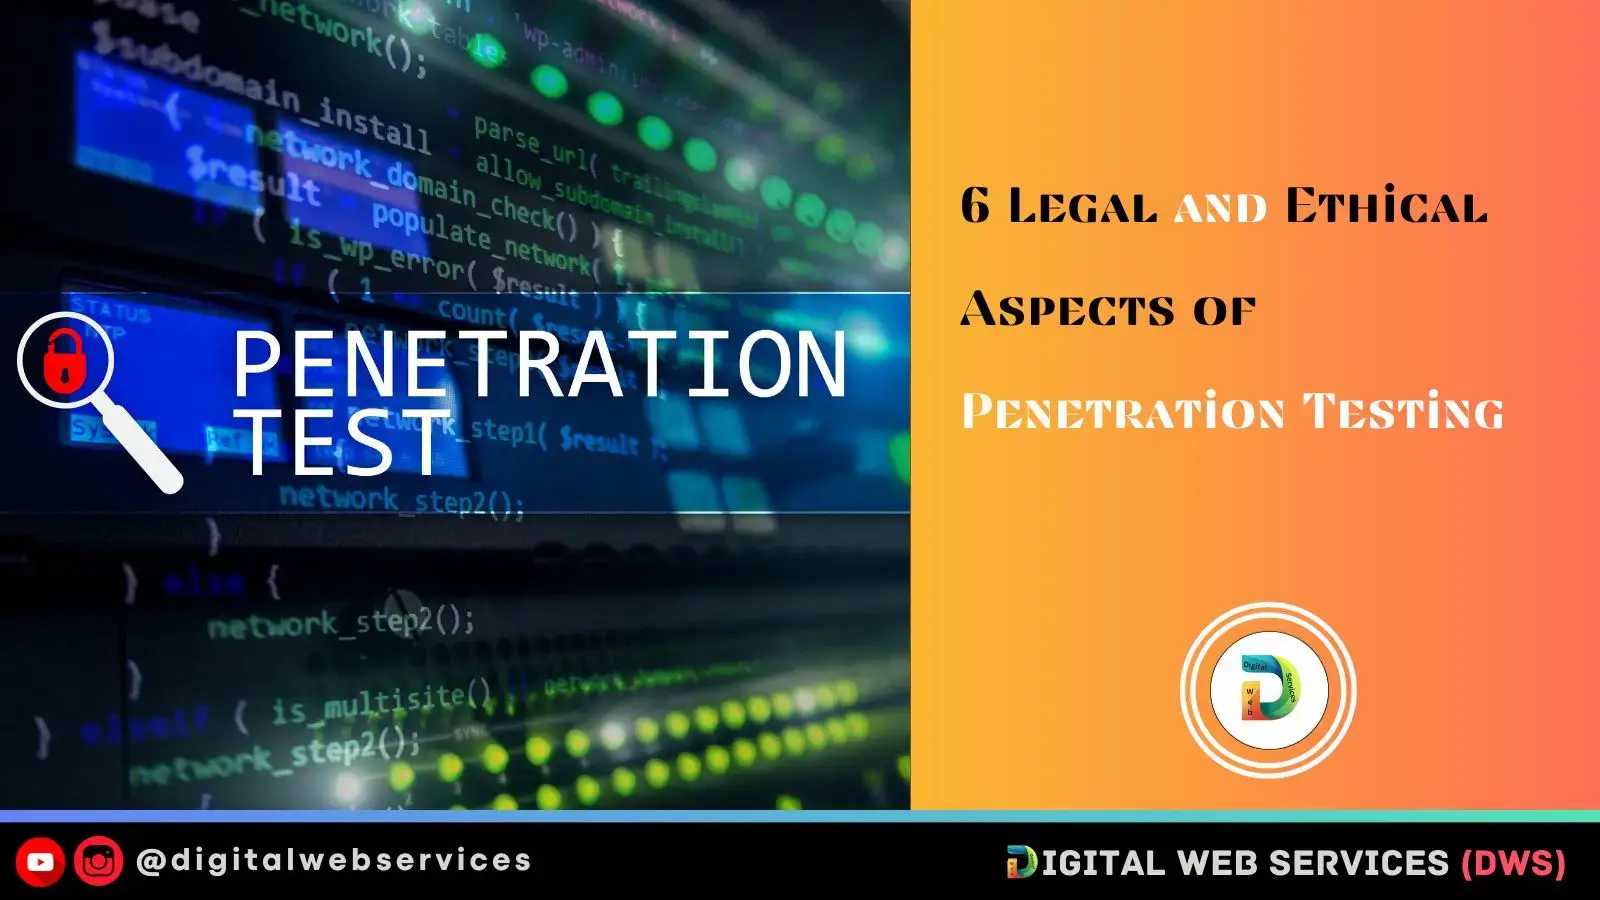 6 Legal and Ethical Aspects of Penetration Testing